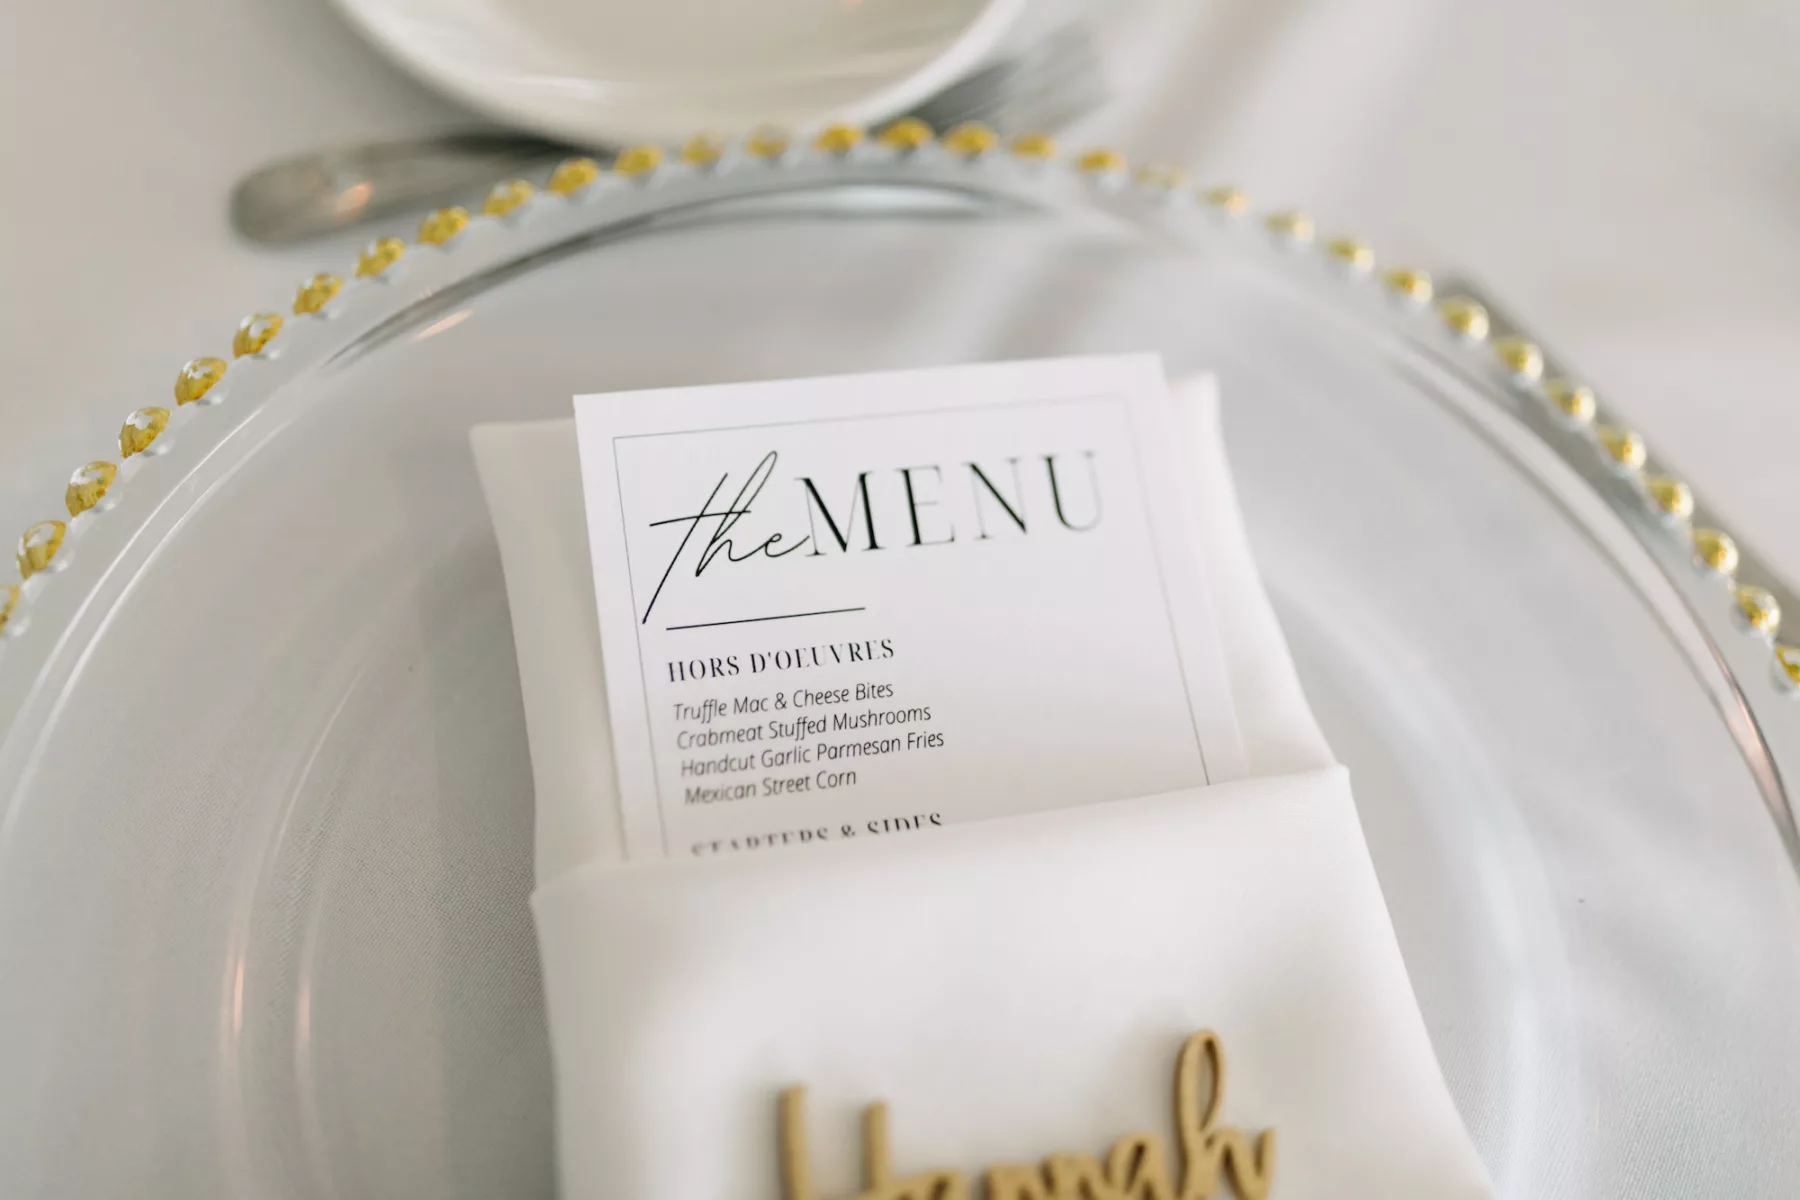 Classic The Menu Wedding Reception Card Ideas | Laser Cut Place Card Inspiration | Tampa Bay Caterer Amici's Catering